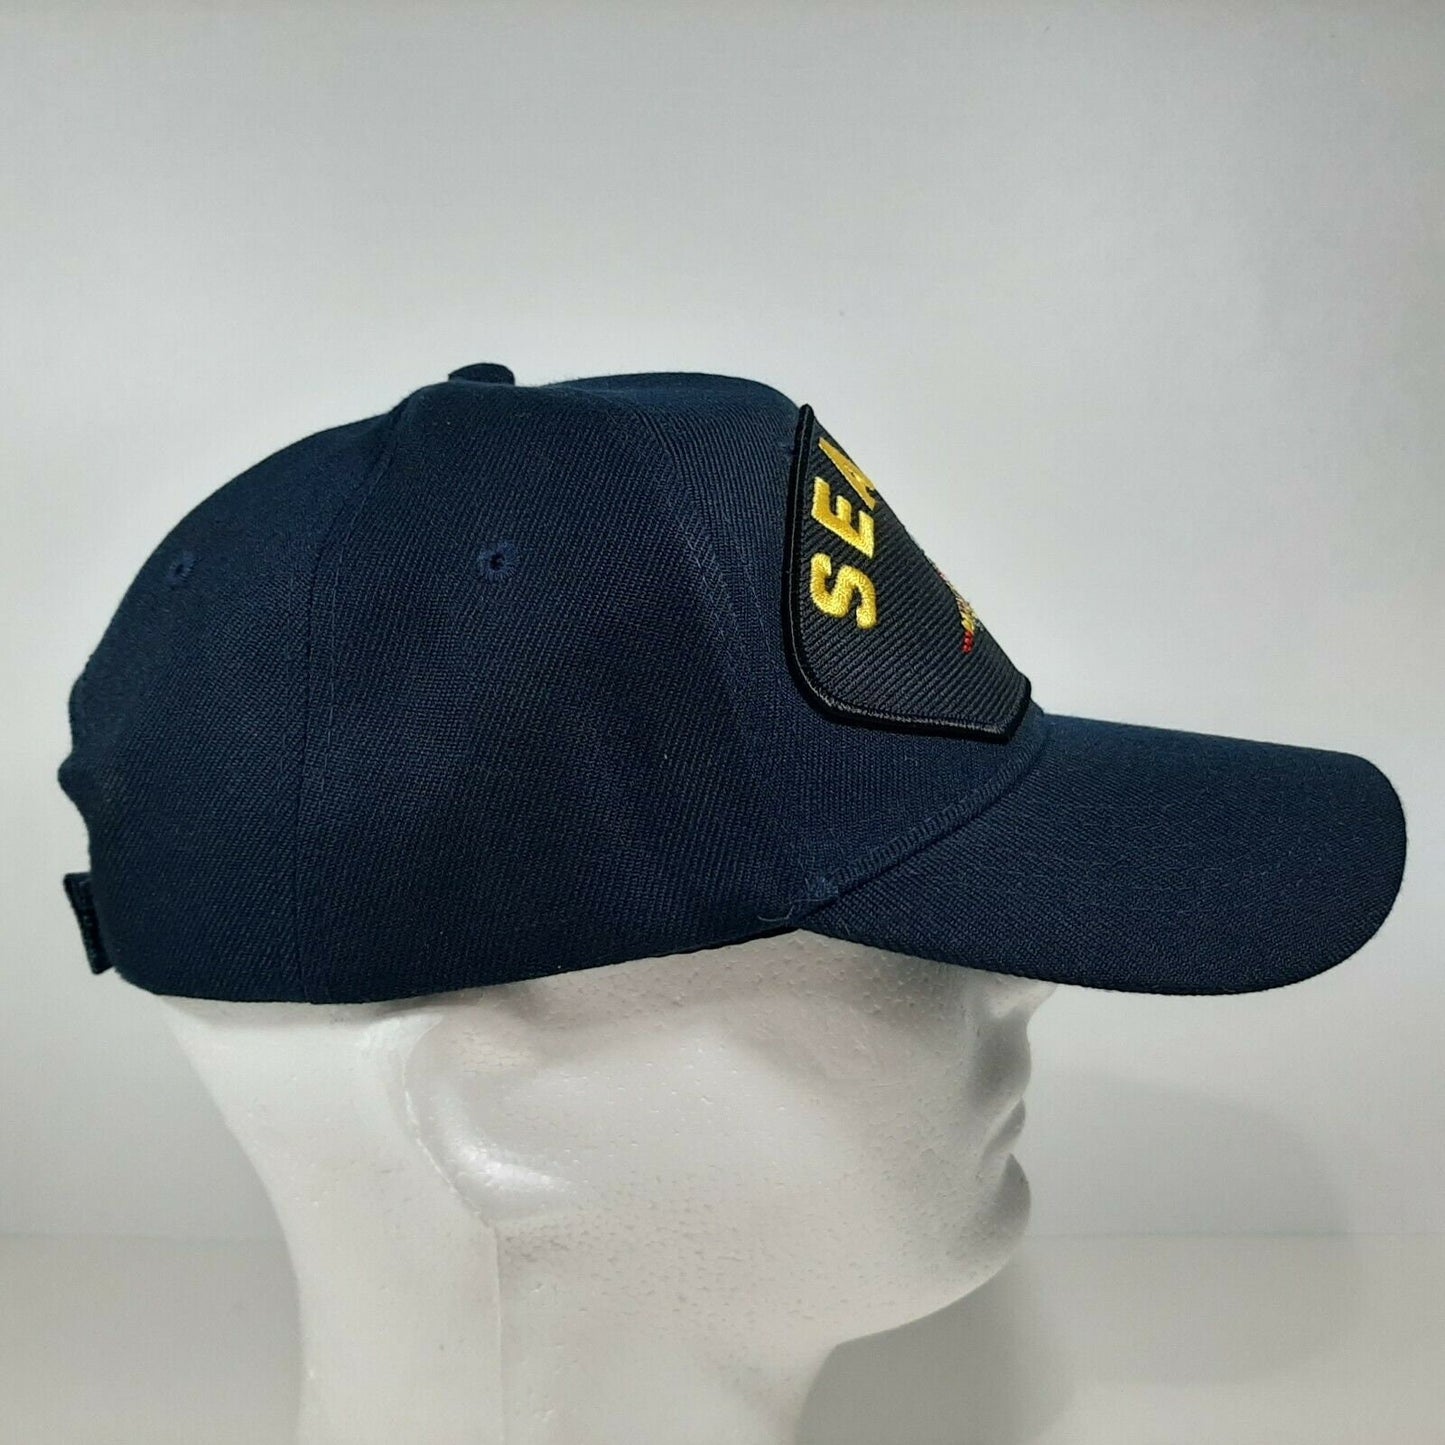 U.S. Navy Seabees Can Do Men's Cap Patch Hat Navy Blue Acrylic